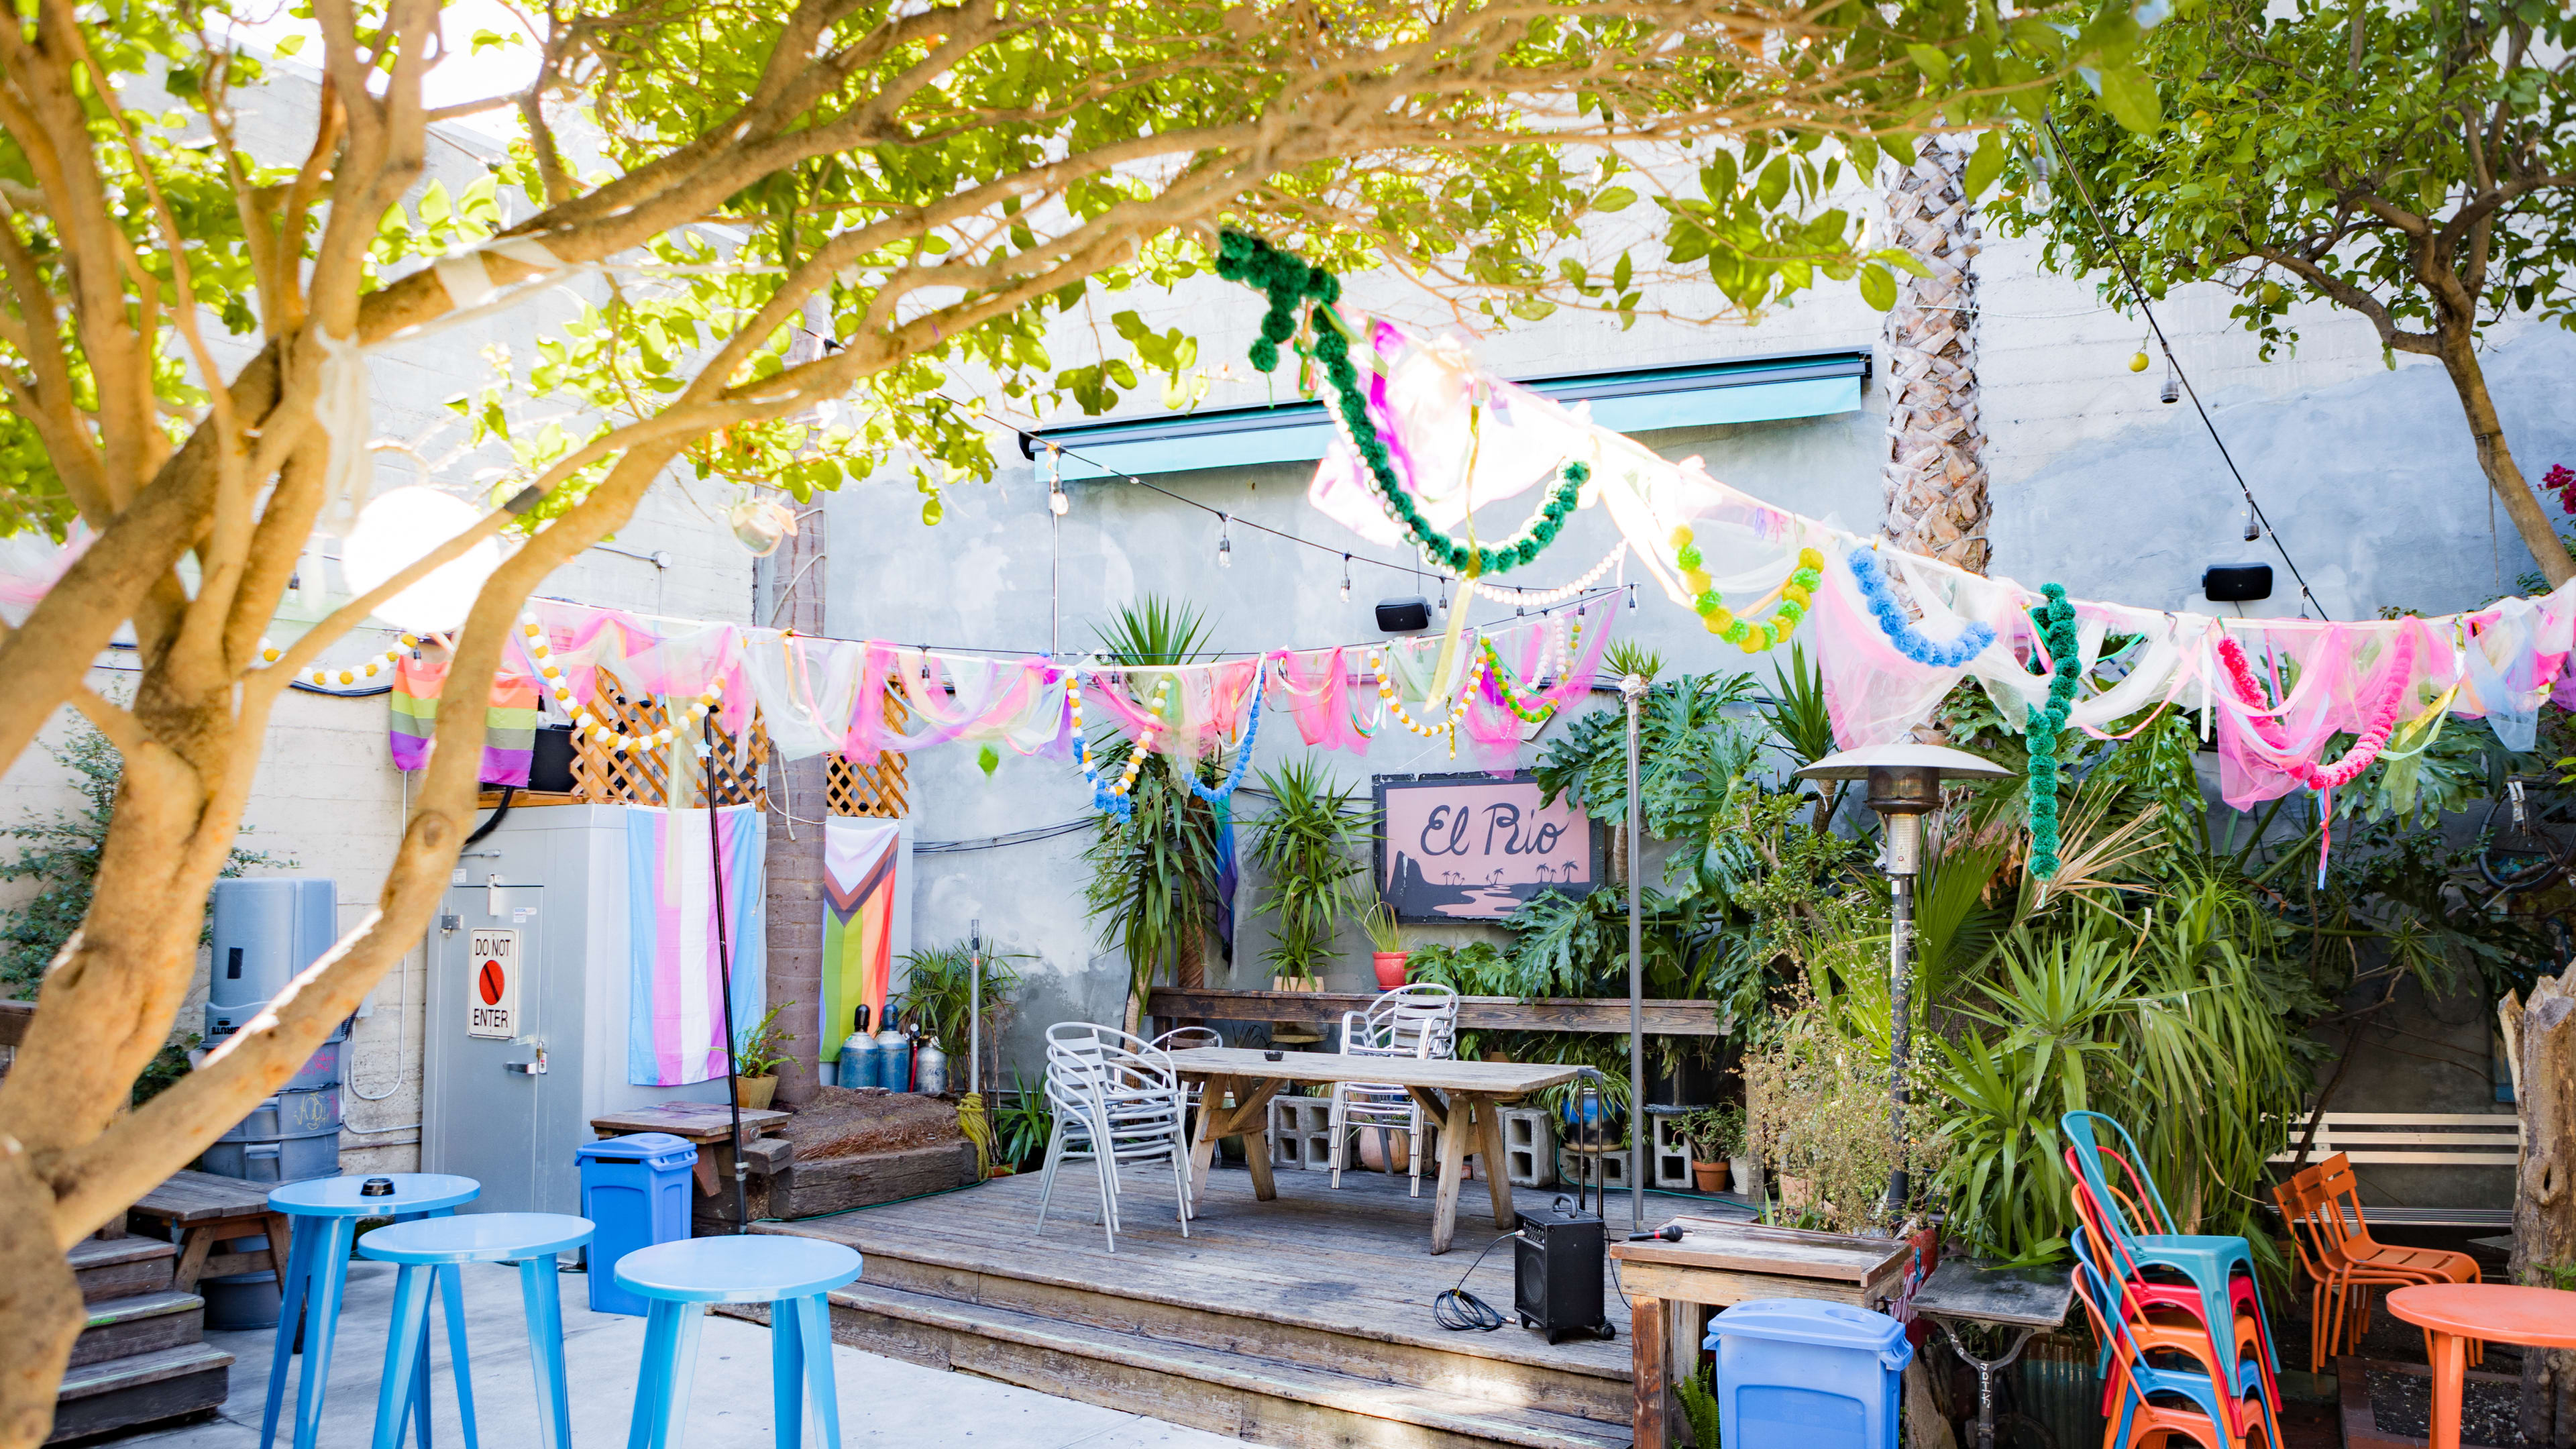 The patio at El Rio with seats, LGBTQ+ flags, and pom poms overhead